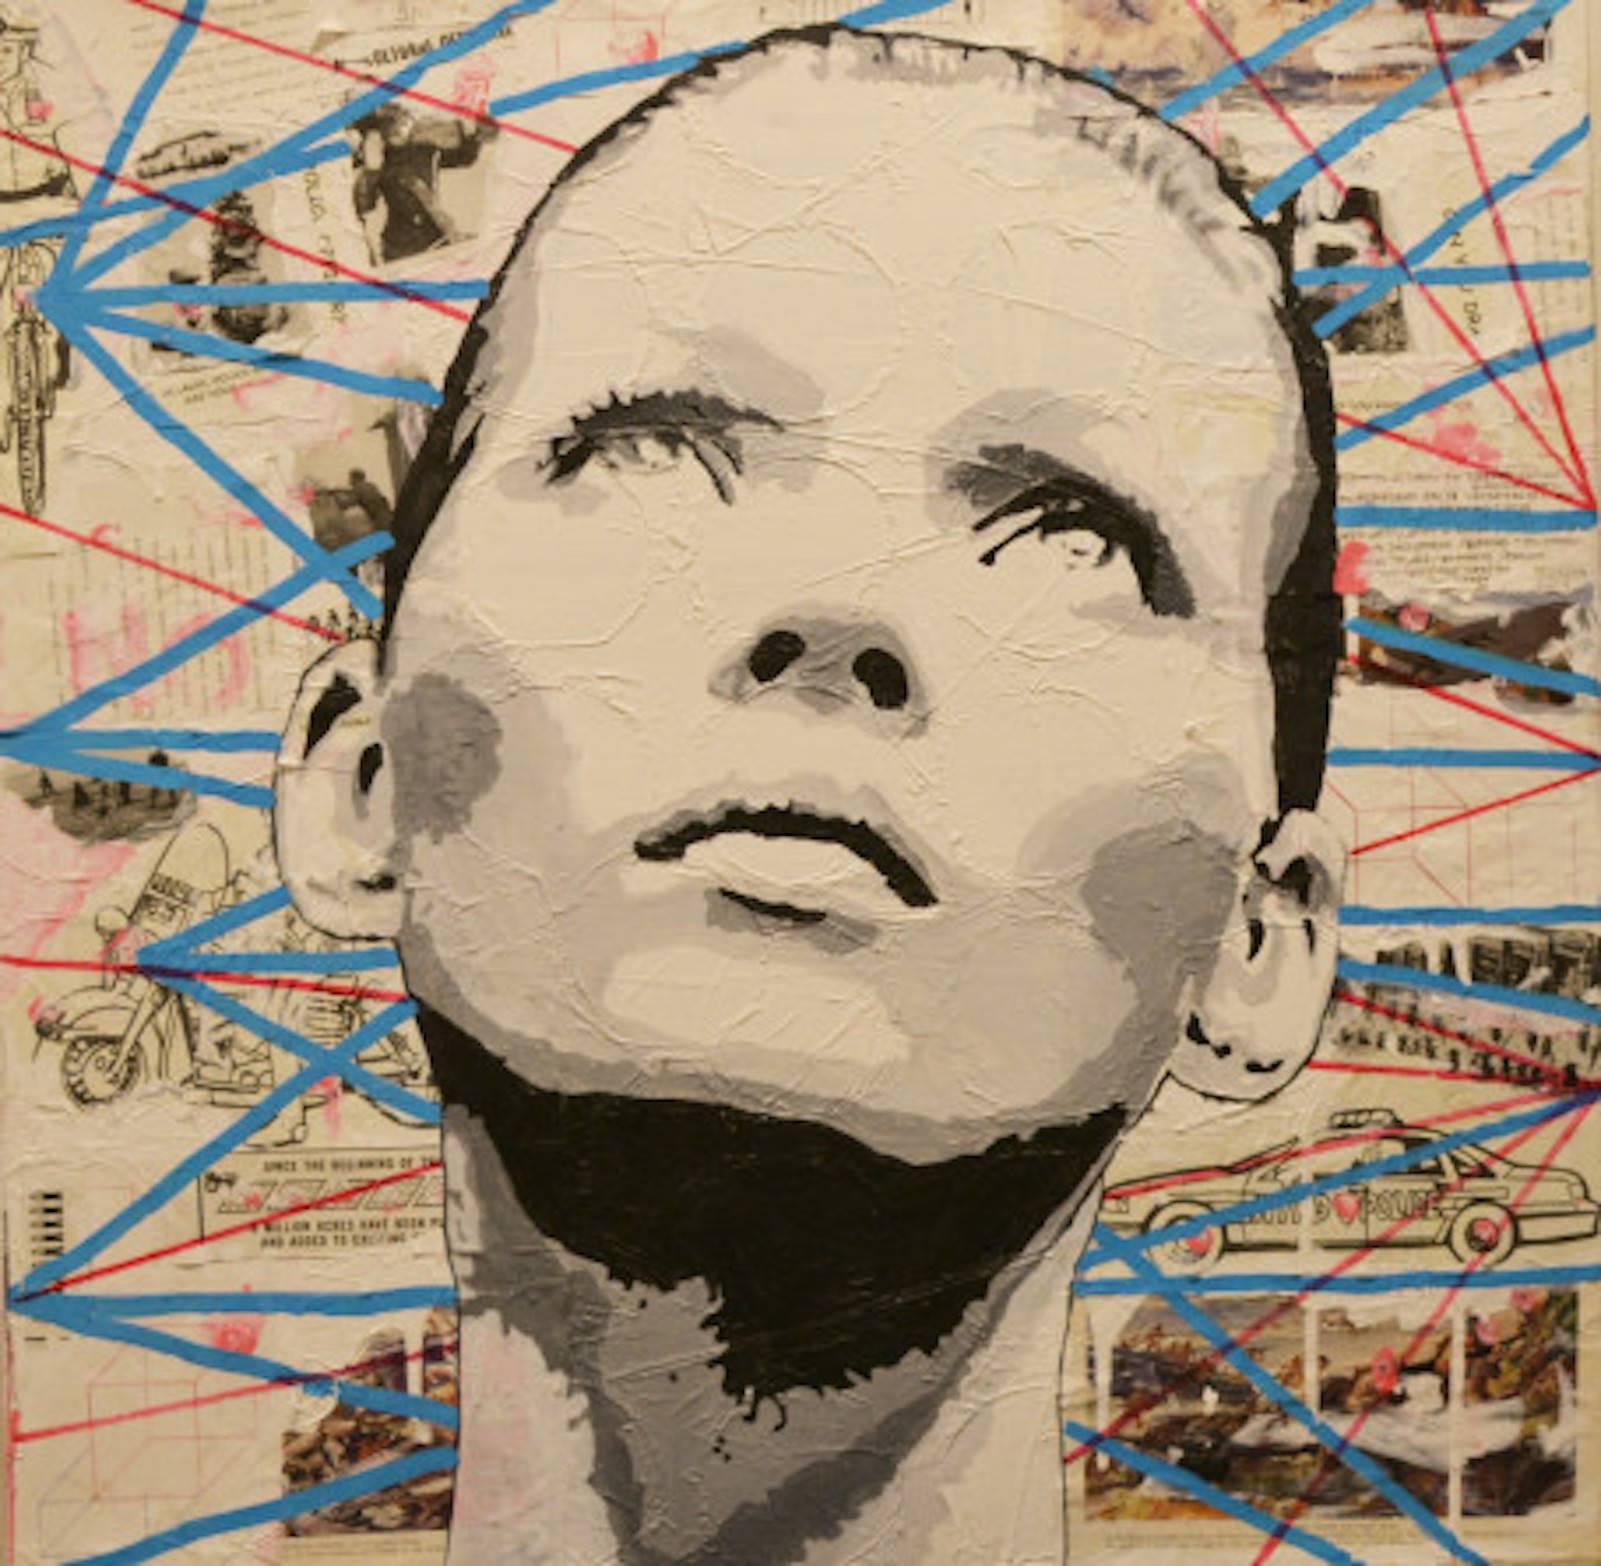 Pondering Connections - Mixed Media Art by Jason Poremba